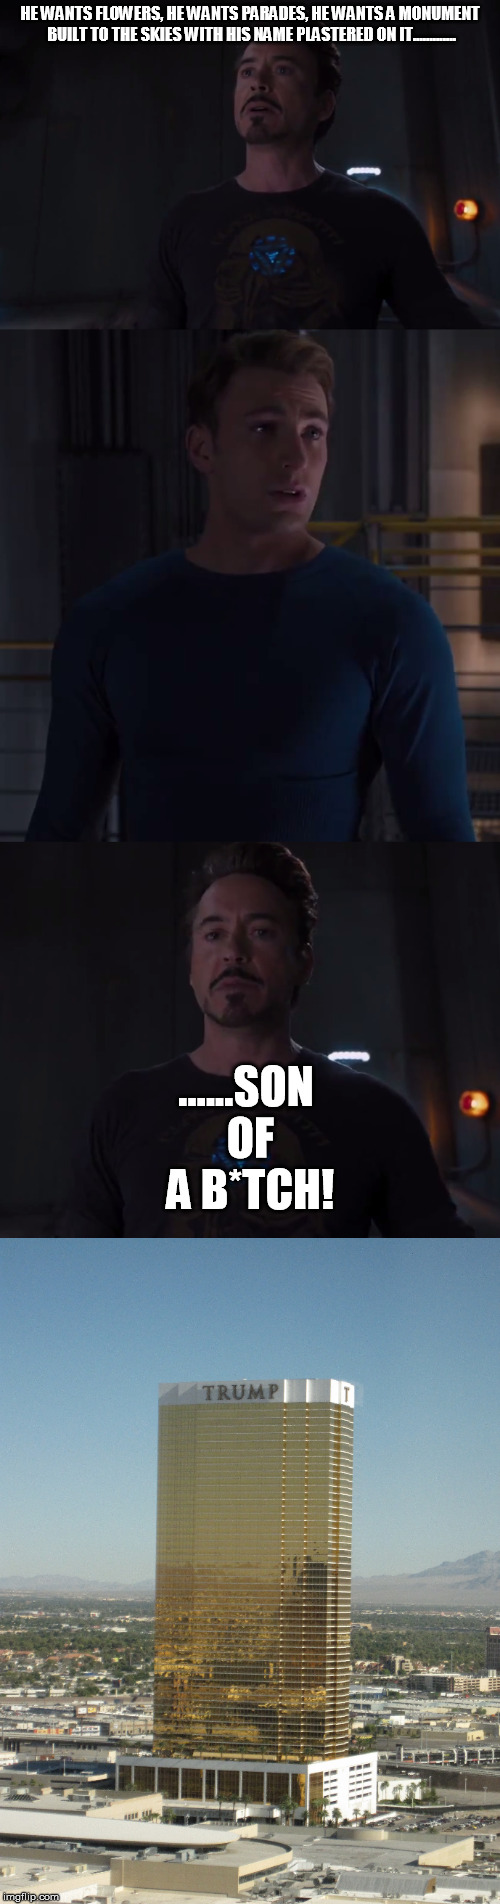 Sudden Clarity Tony Stark | HE WANTS FLOWERS, HE WANTS PARADES, HE WANTS A MONUMENT BUILT TO THE SKIES WITH HIS NAME PLASTERED ON IT............. ......SON OF A B*TCH! | image tagged in donald trump,memes,the avengers | made w/ Imgflip meme maker